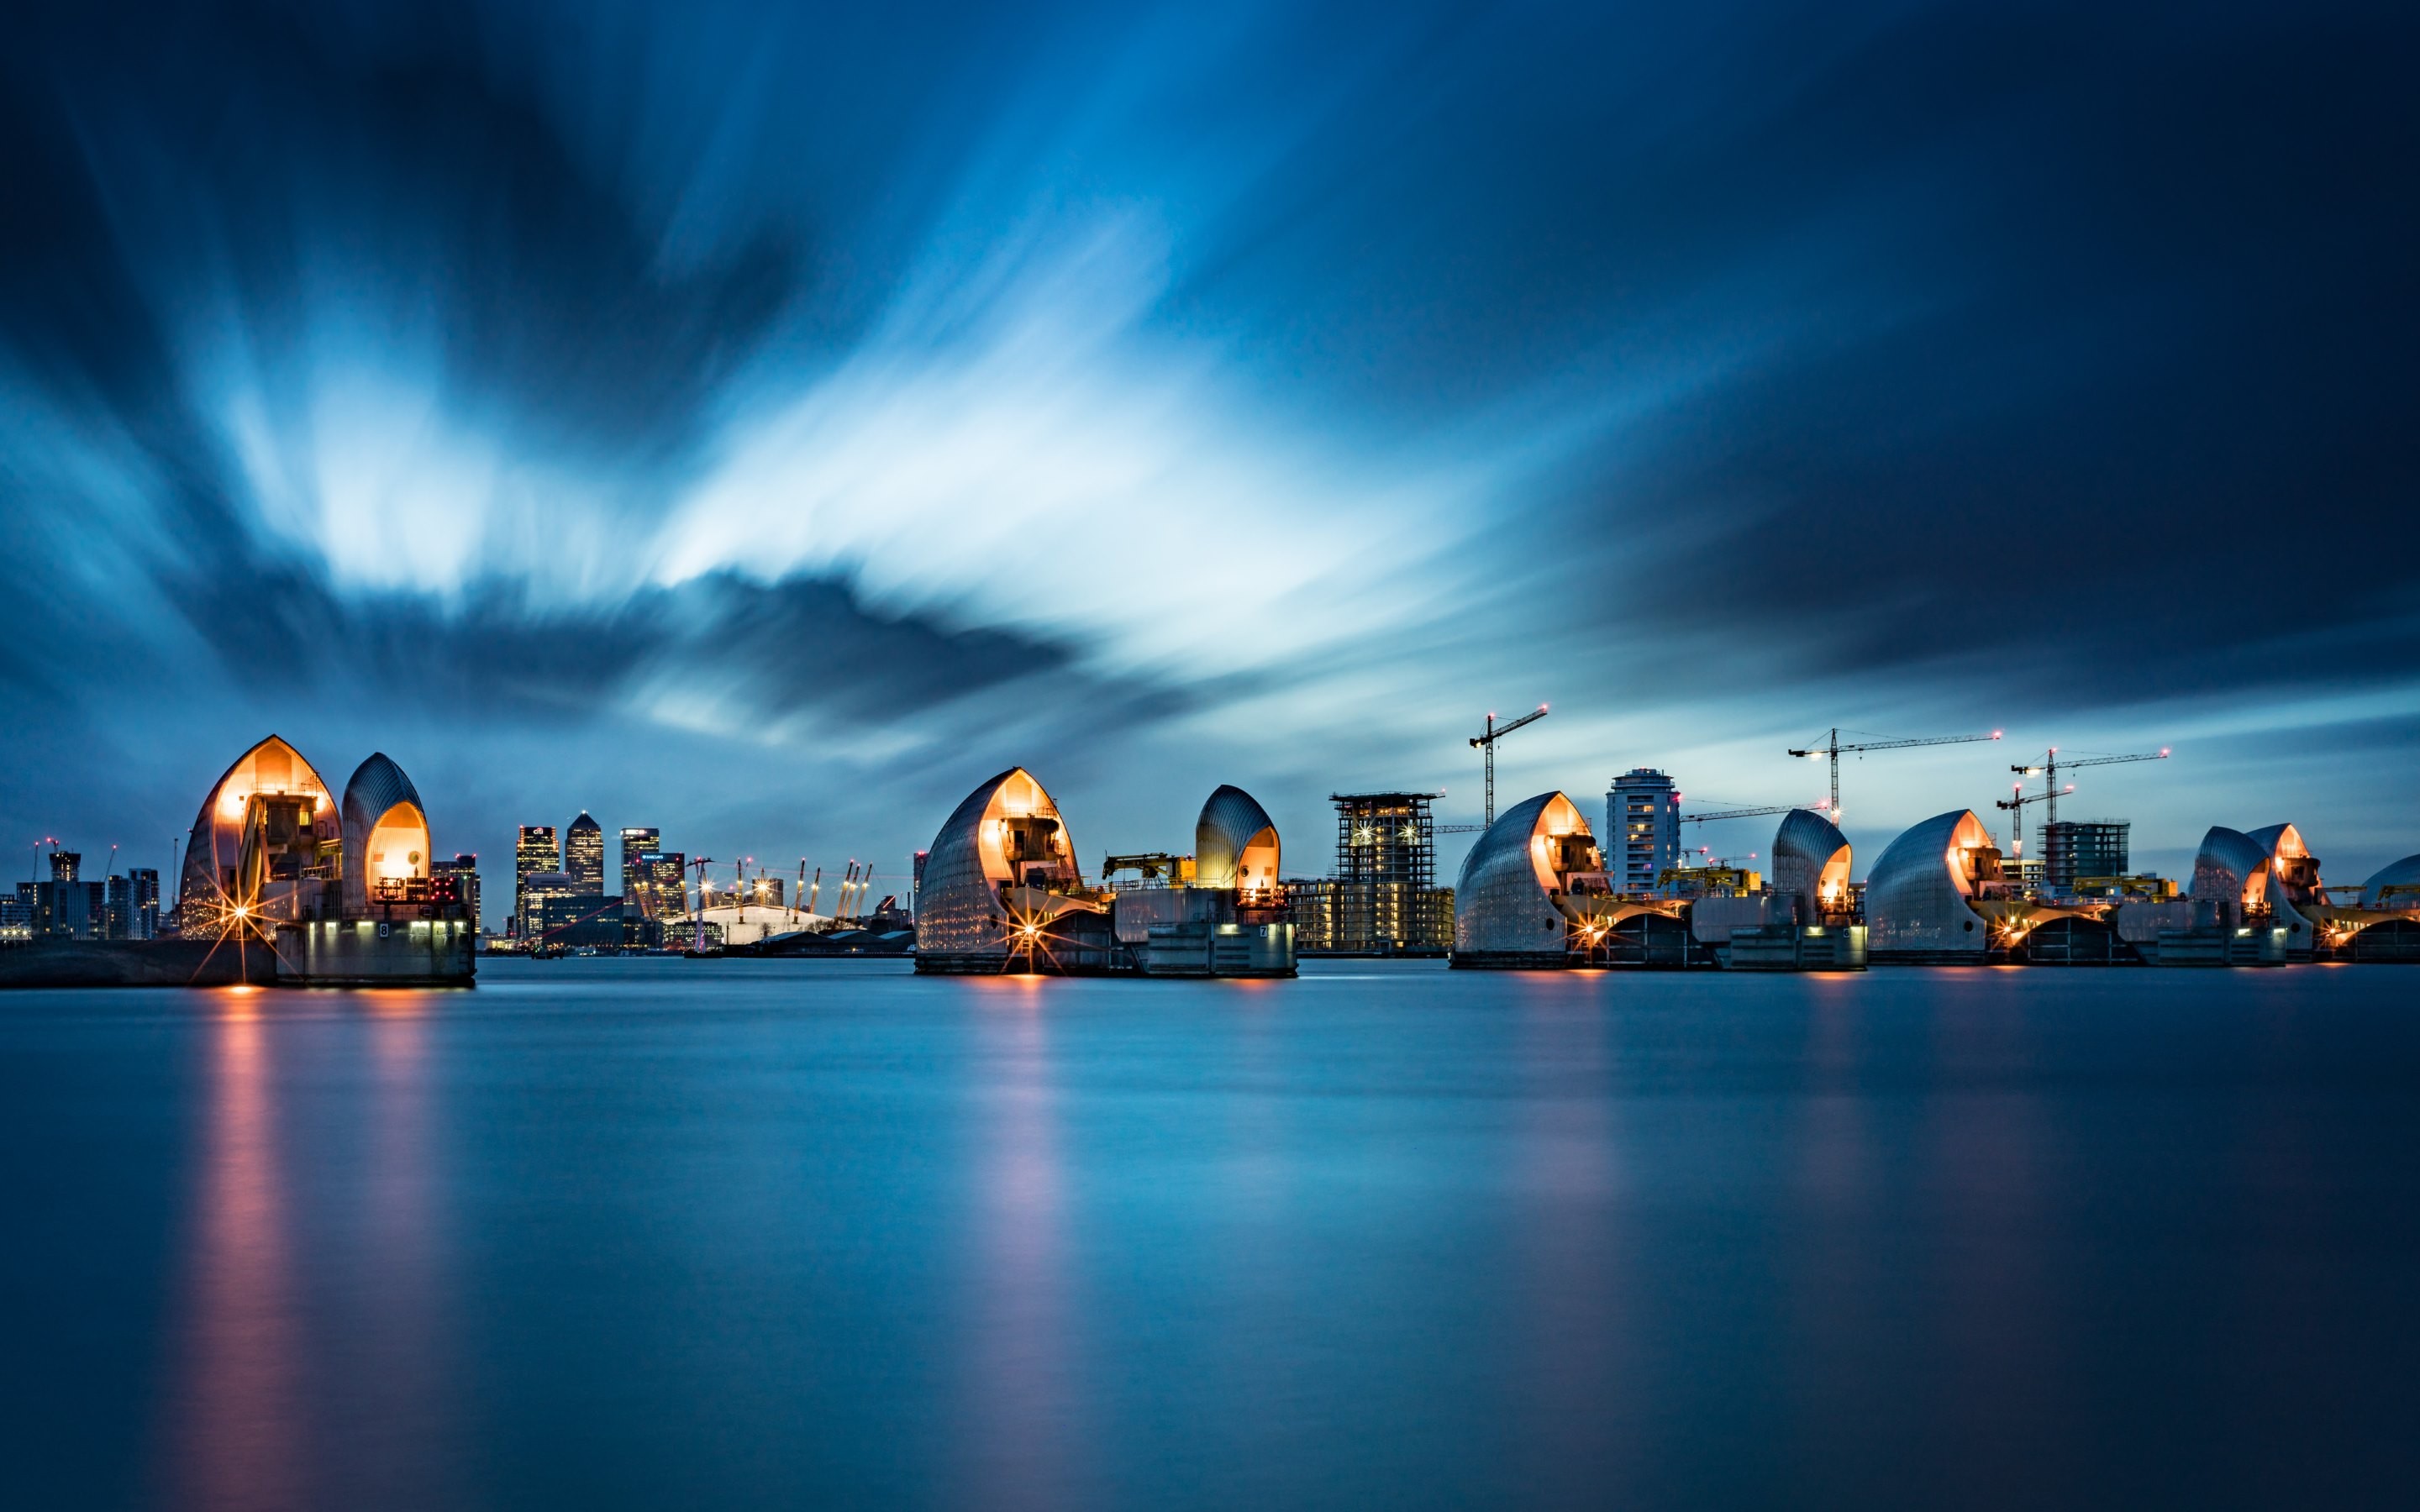 River Night River Thames London Lights Cranes Machine Water Architecture Long Exposure 2880x1800